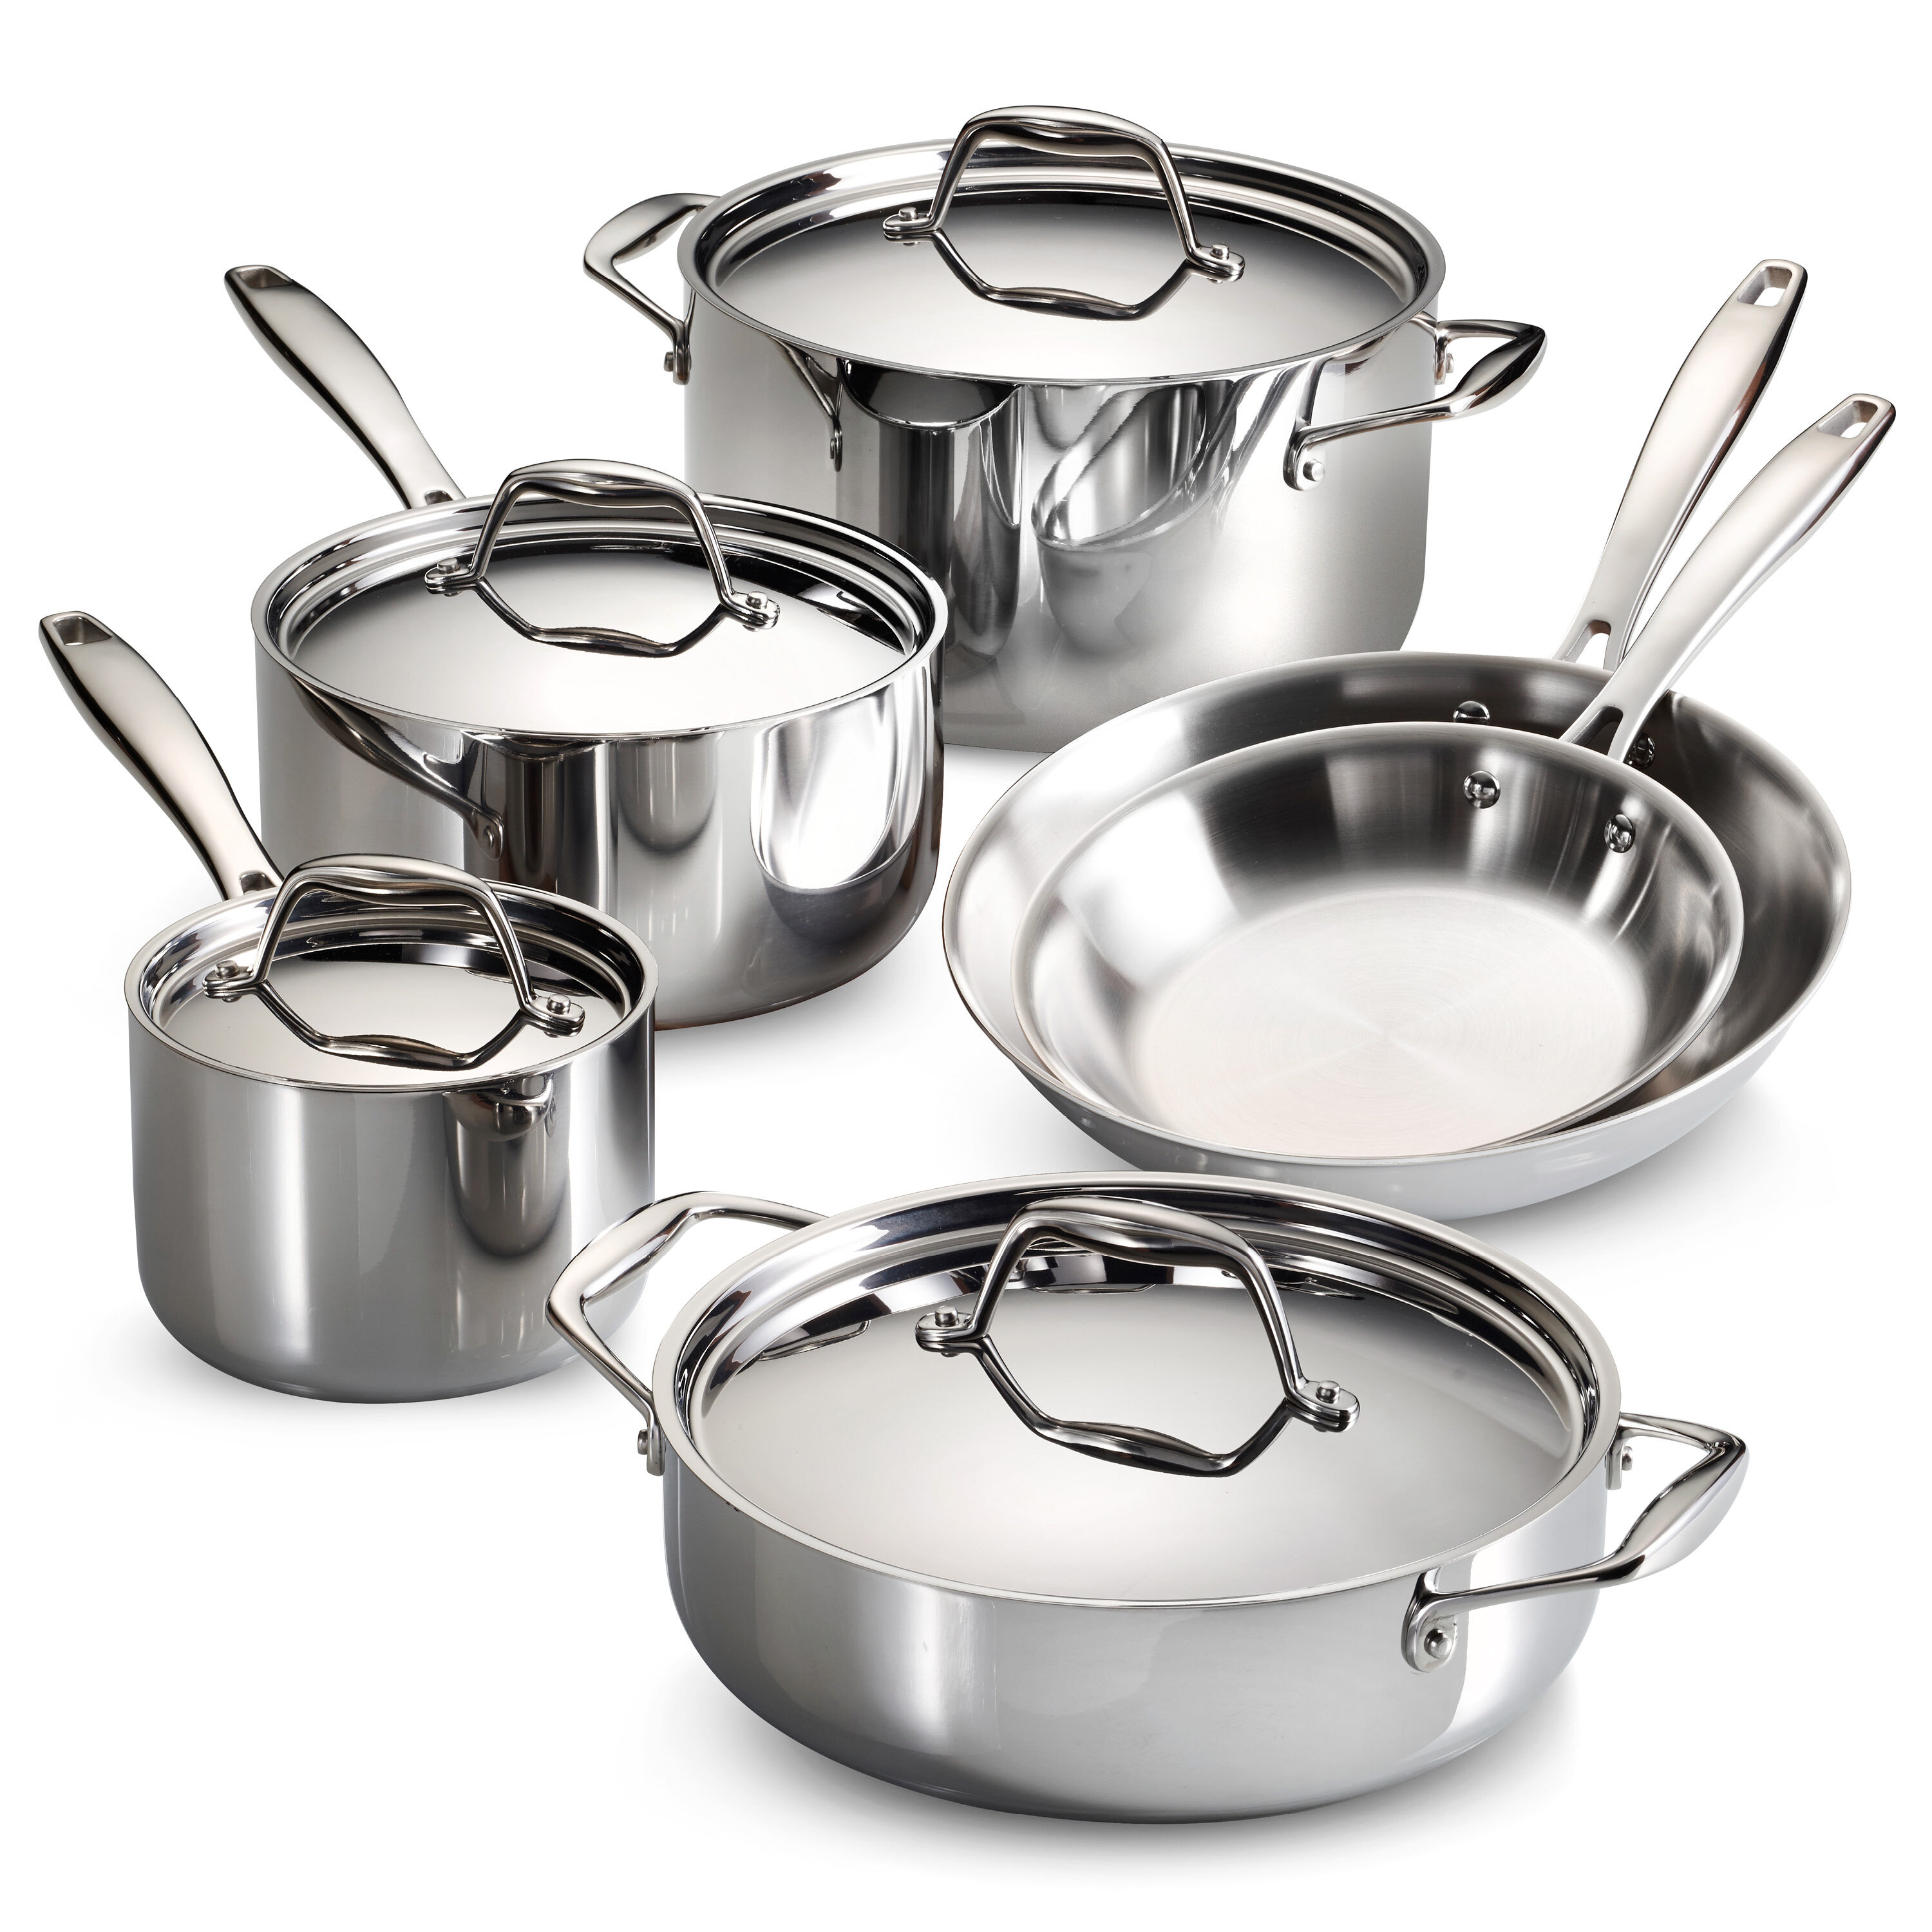 Tramontina Tri-Ply Clad Gourmet 10 Pc Cookware Set & Reviews